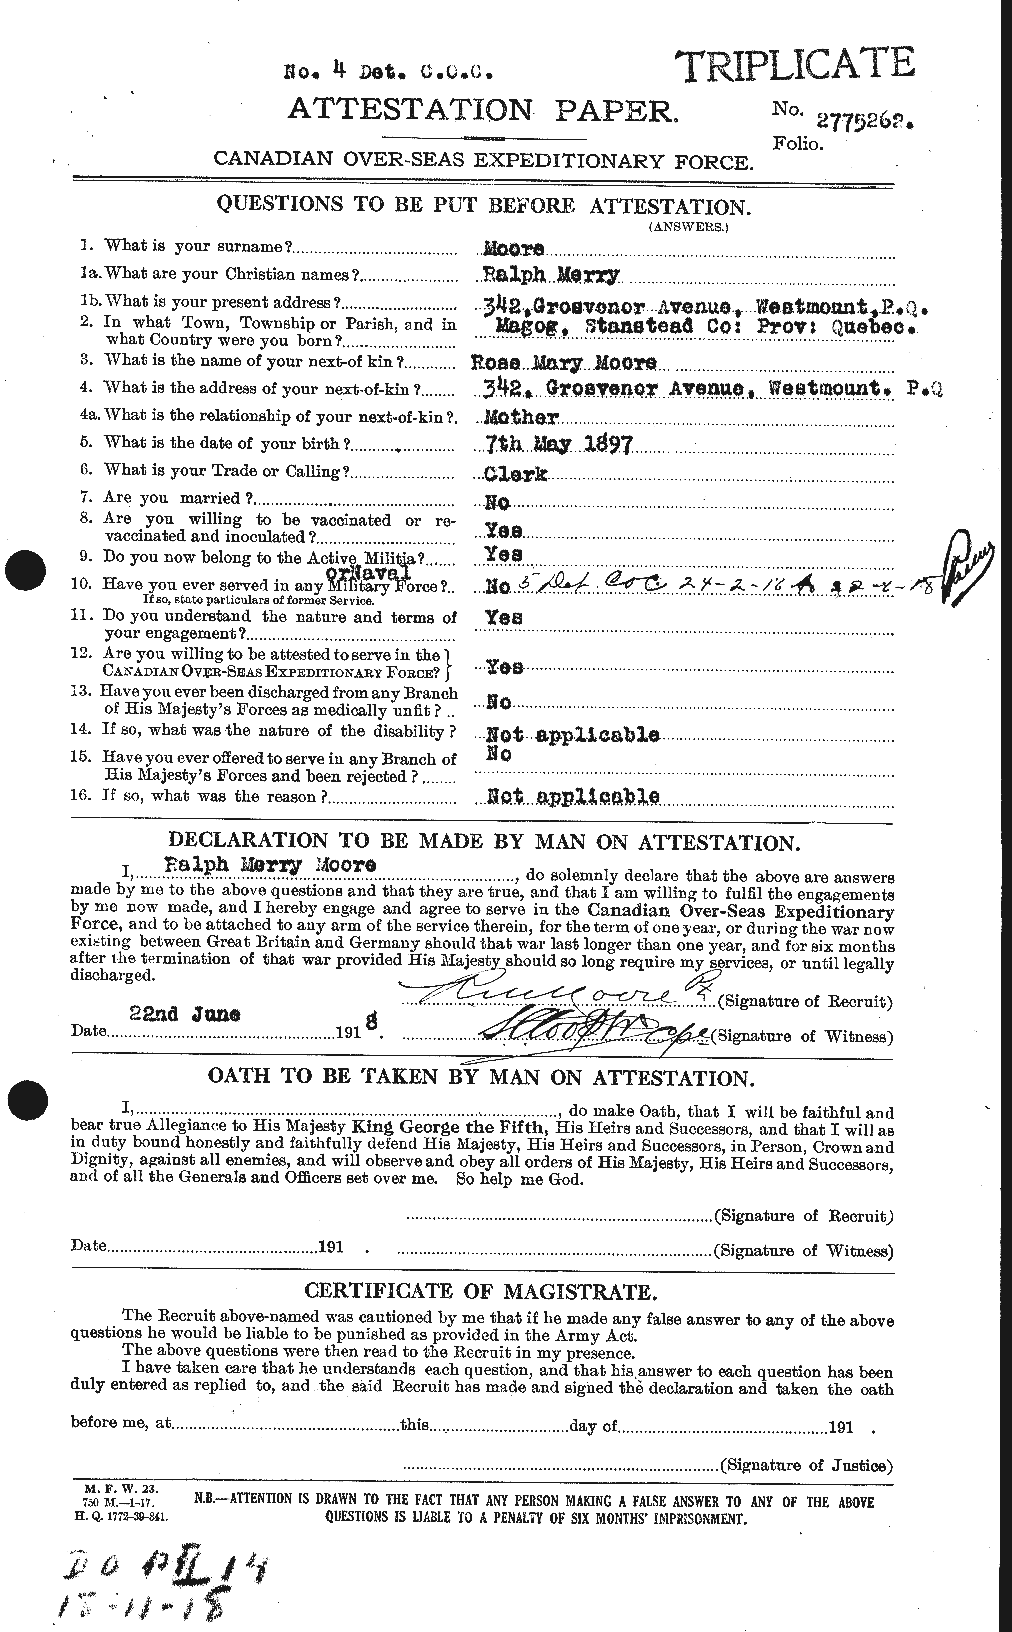 Personnel Records of the First World War - CEF 503508a